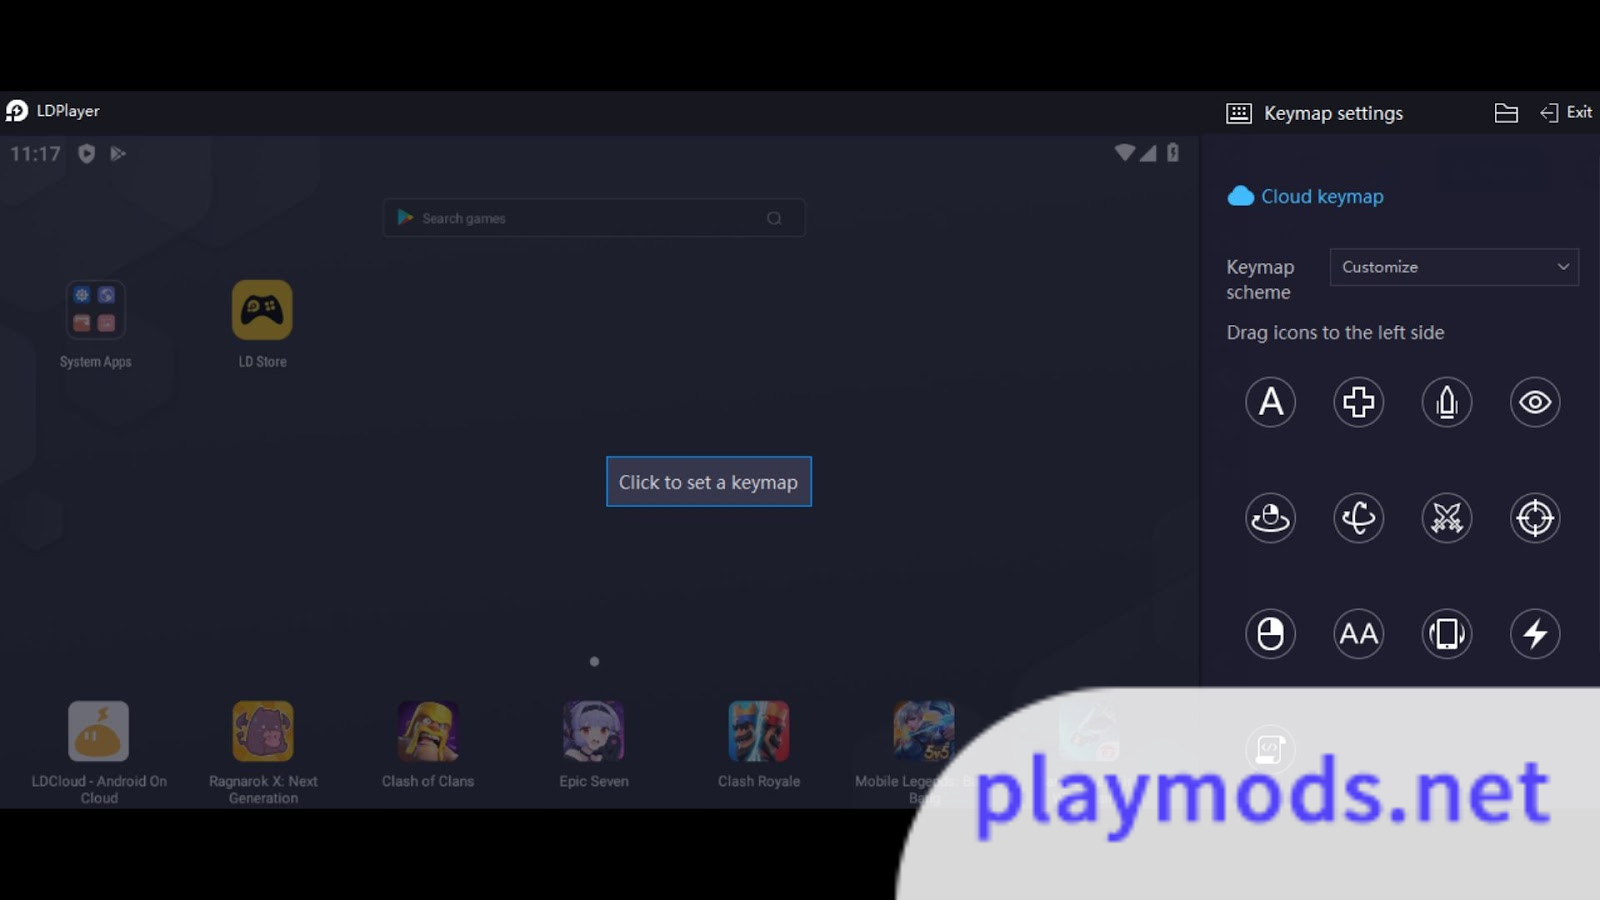 Download Poppy Playtime chapter 2 MOB on PC (Emulator) - LDPlayer